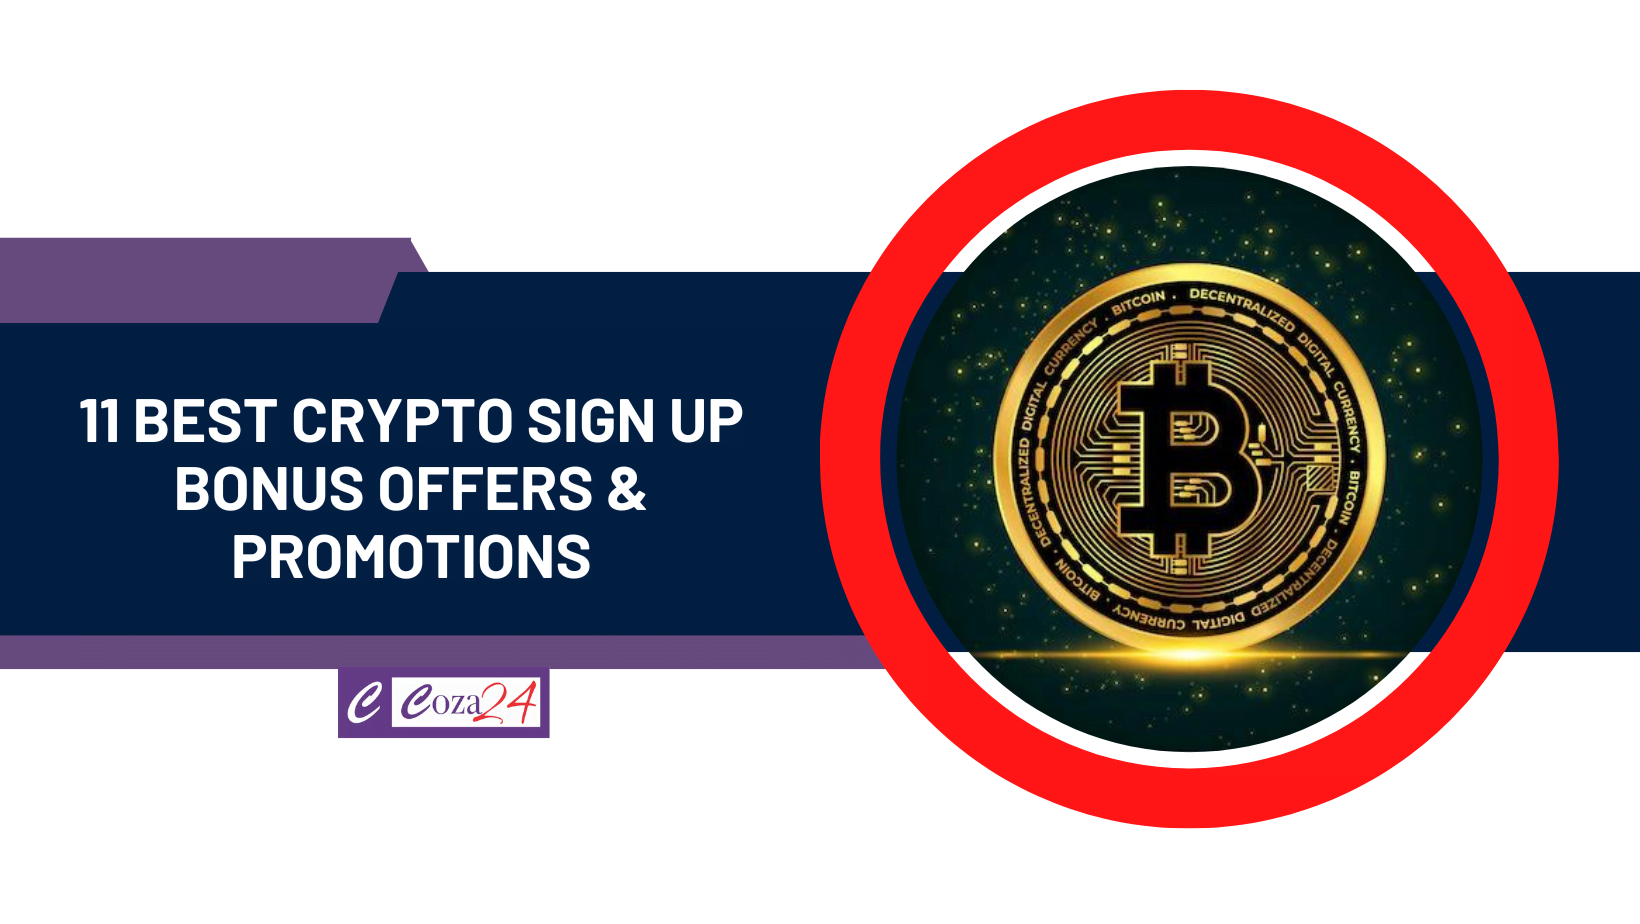 11 Best Crypto Sign Up Bonus Offers & Promotions